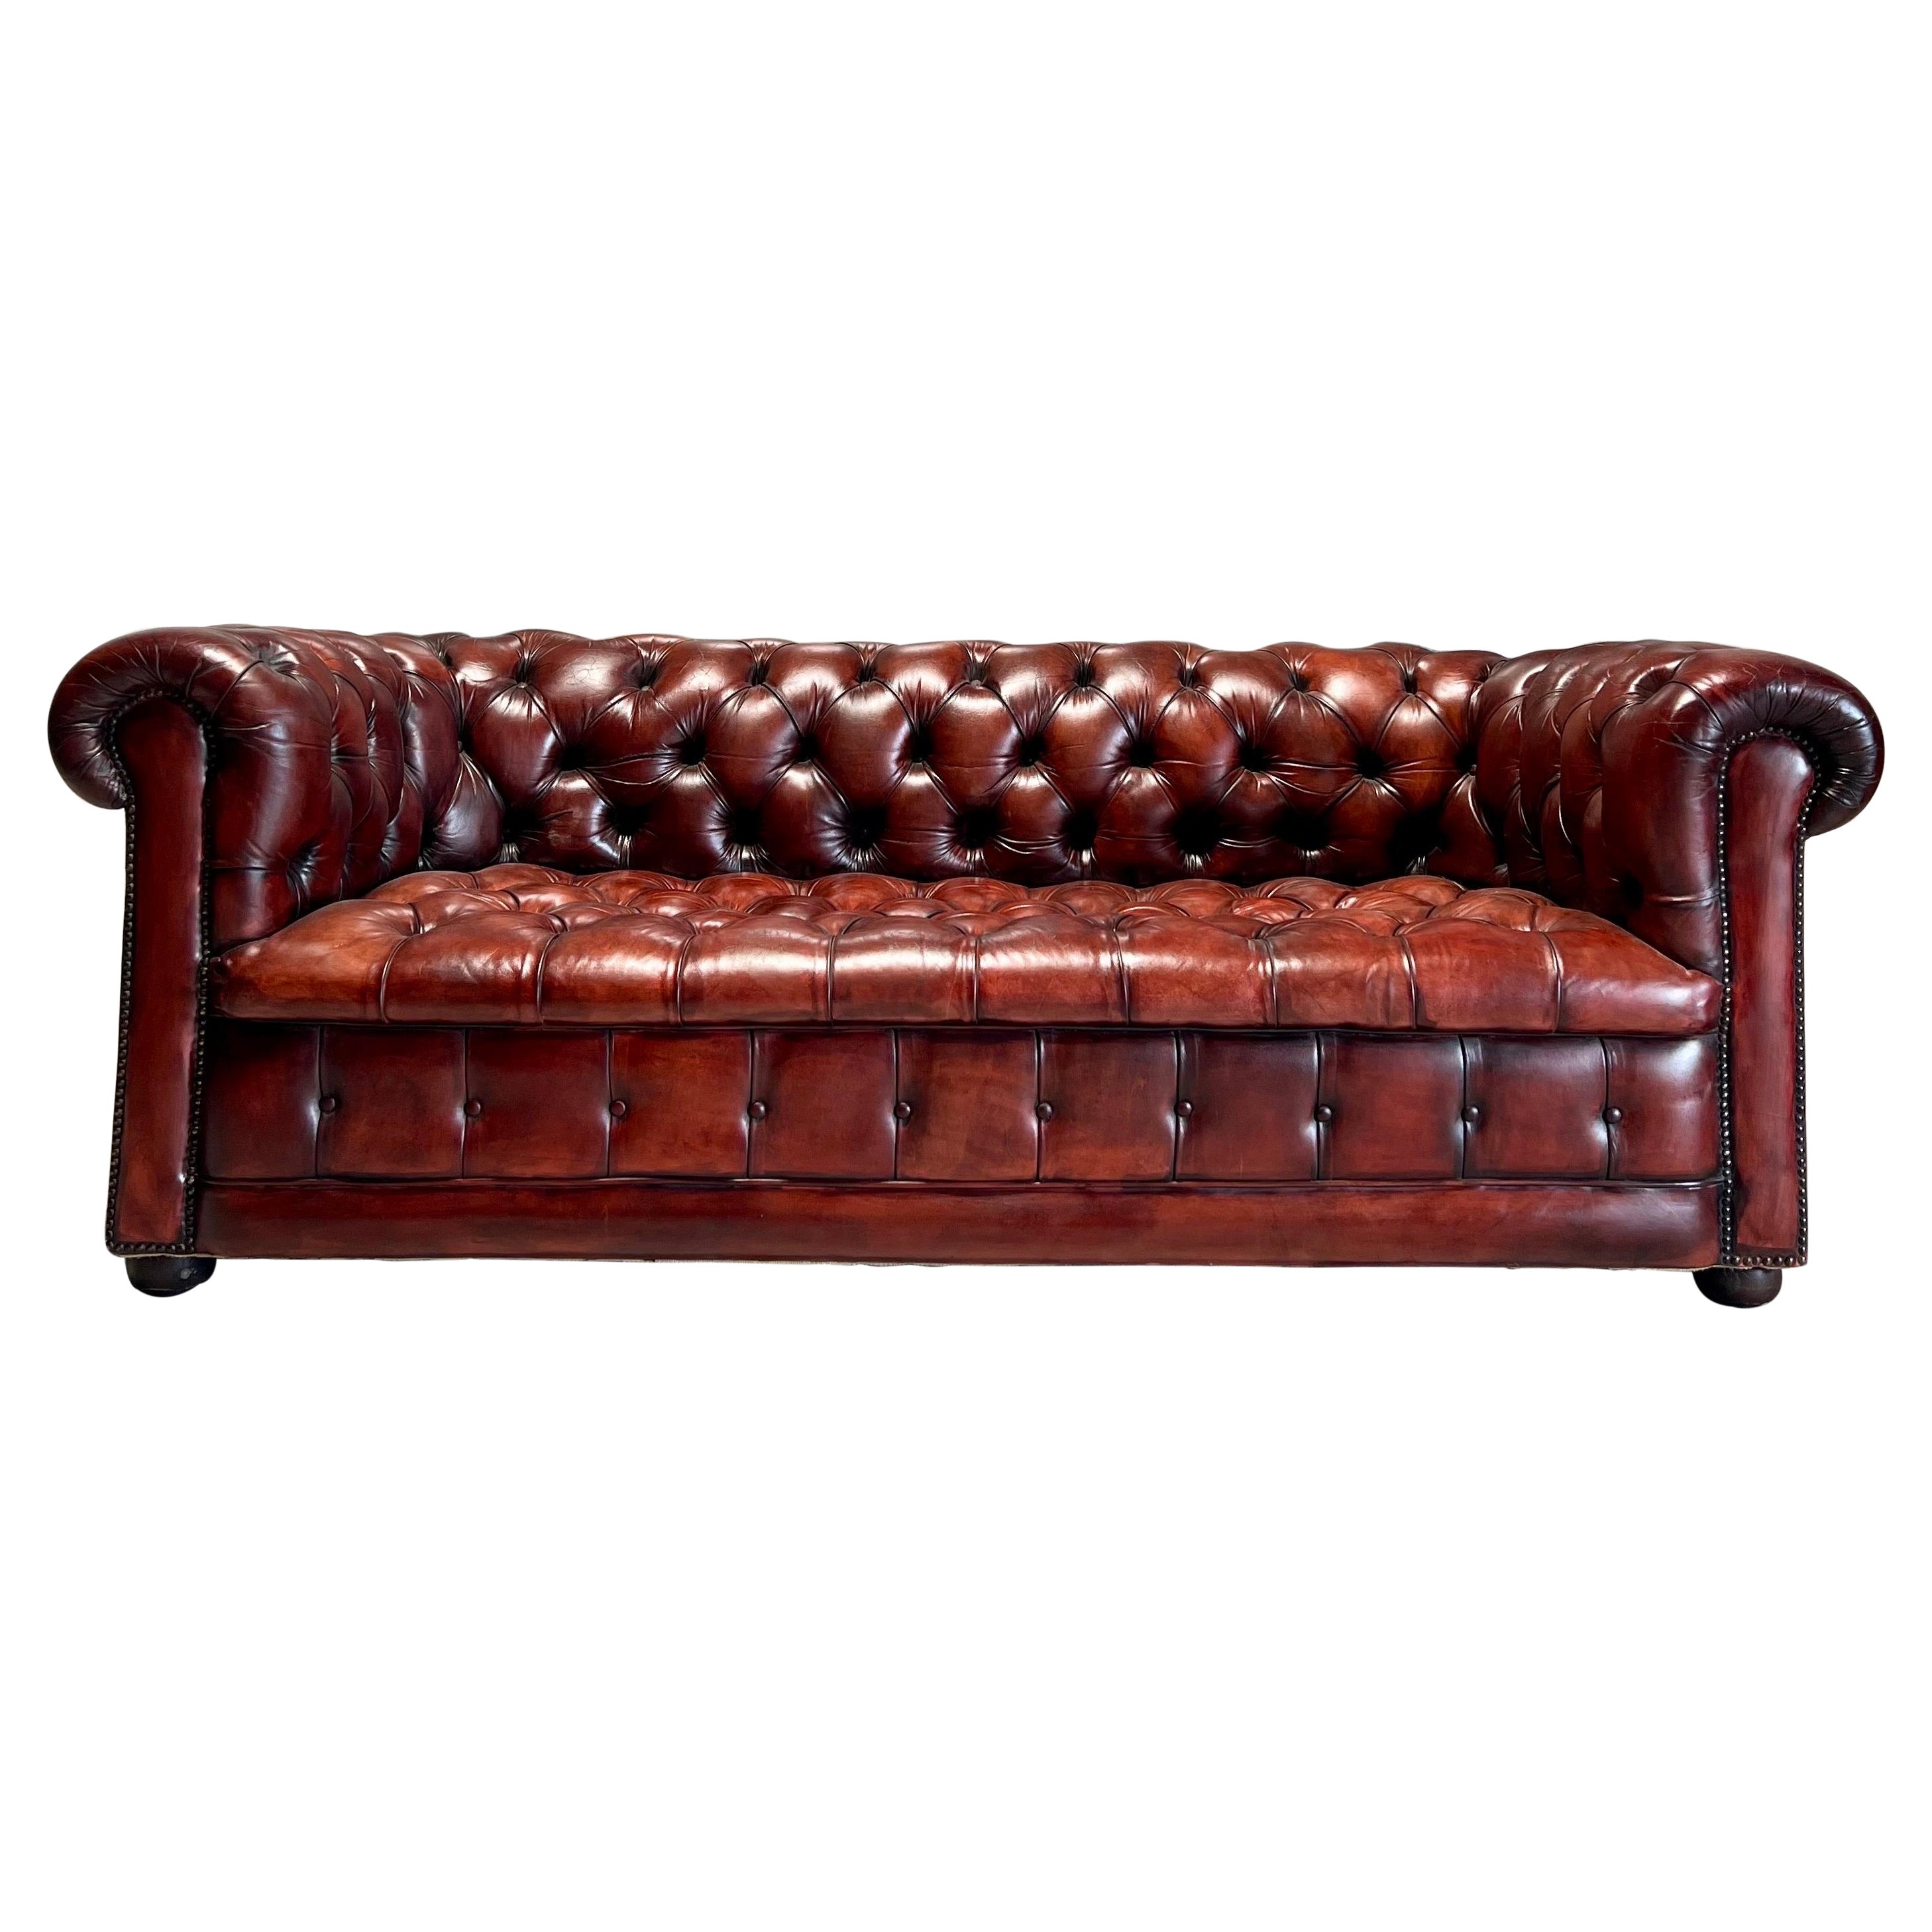 Stunning MidC Chesterfield Sofa in Hand Dyed Leathers